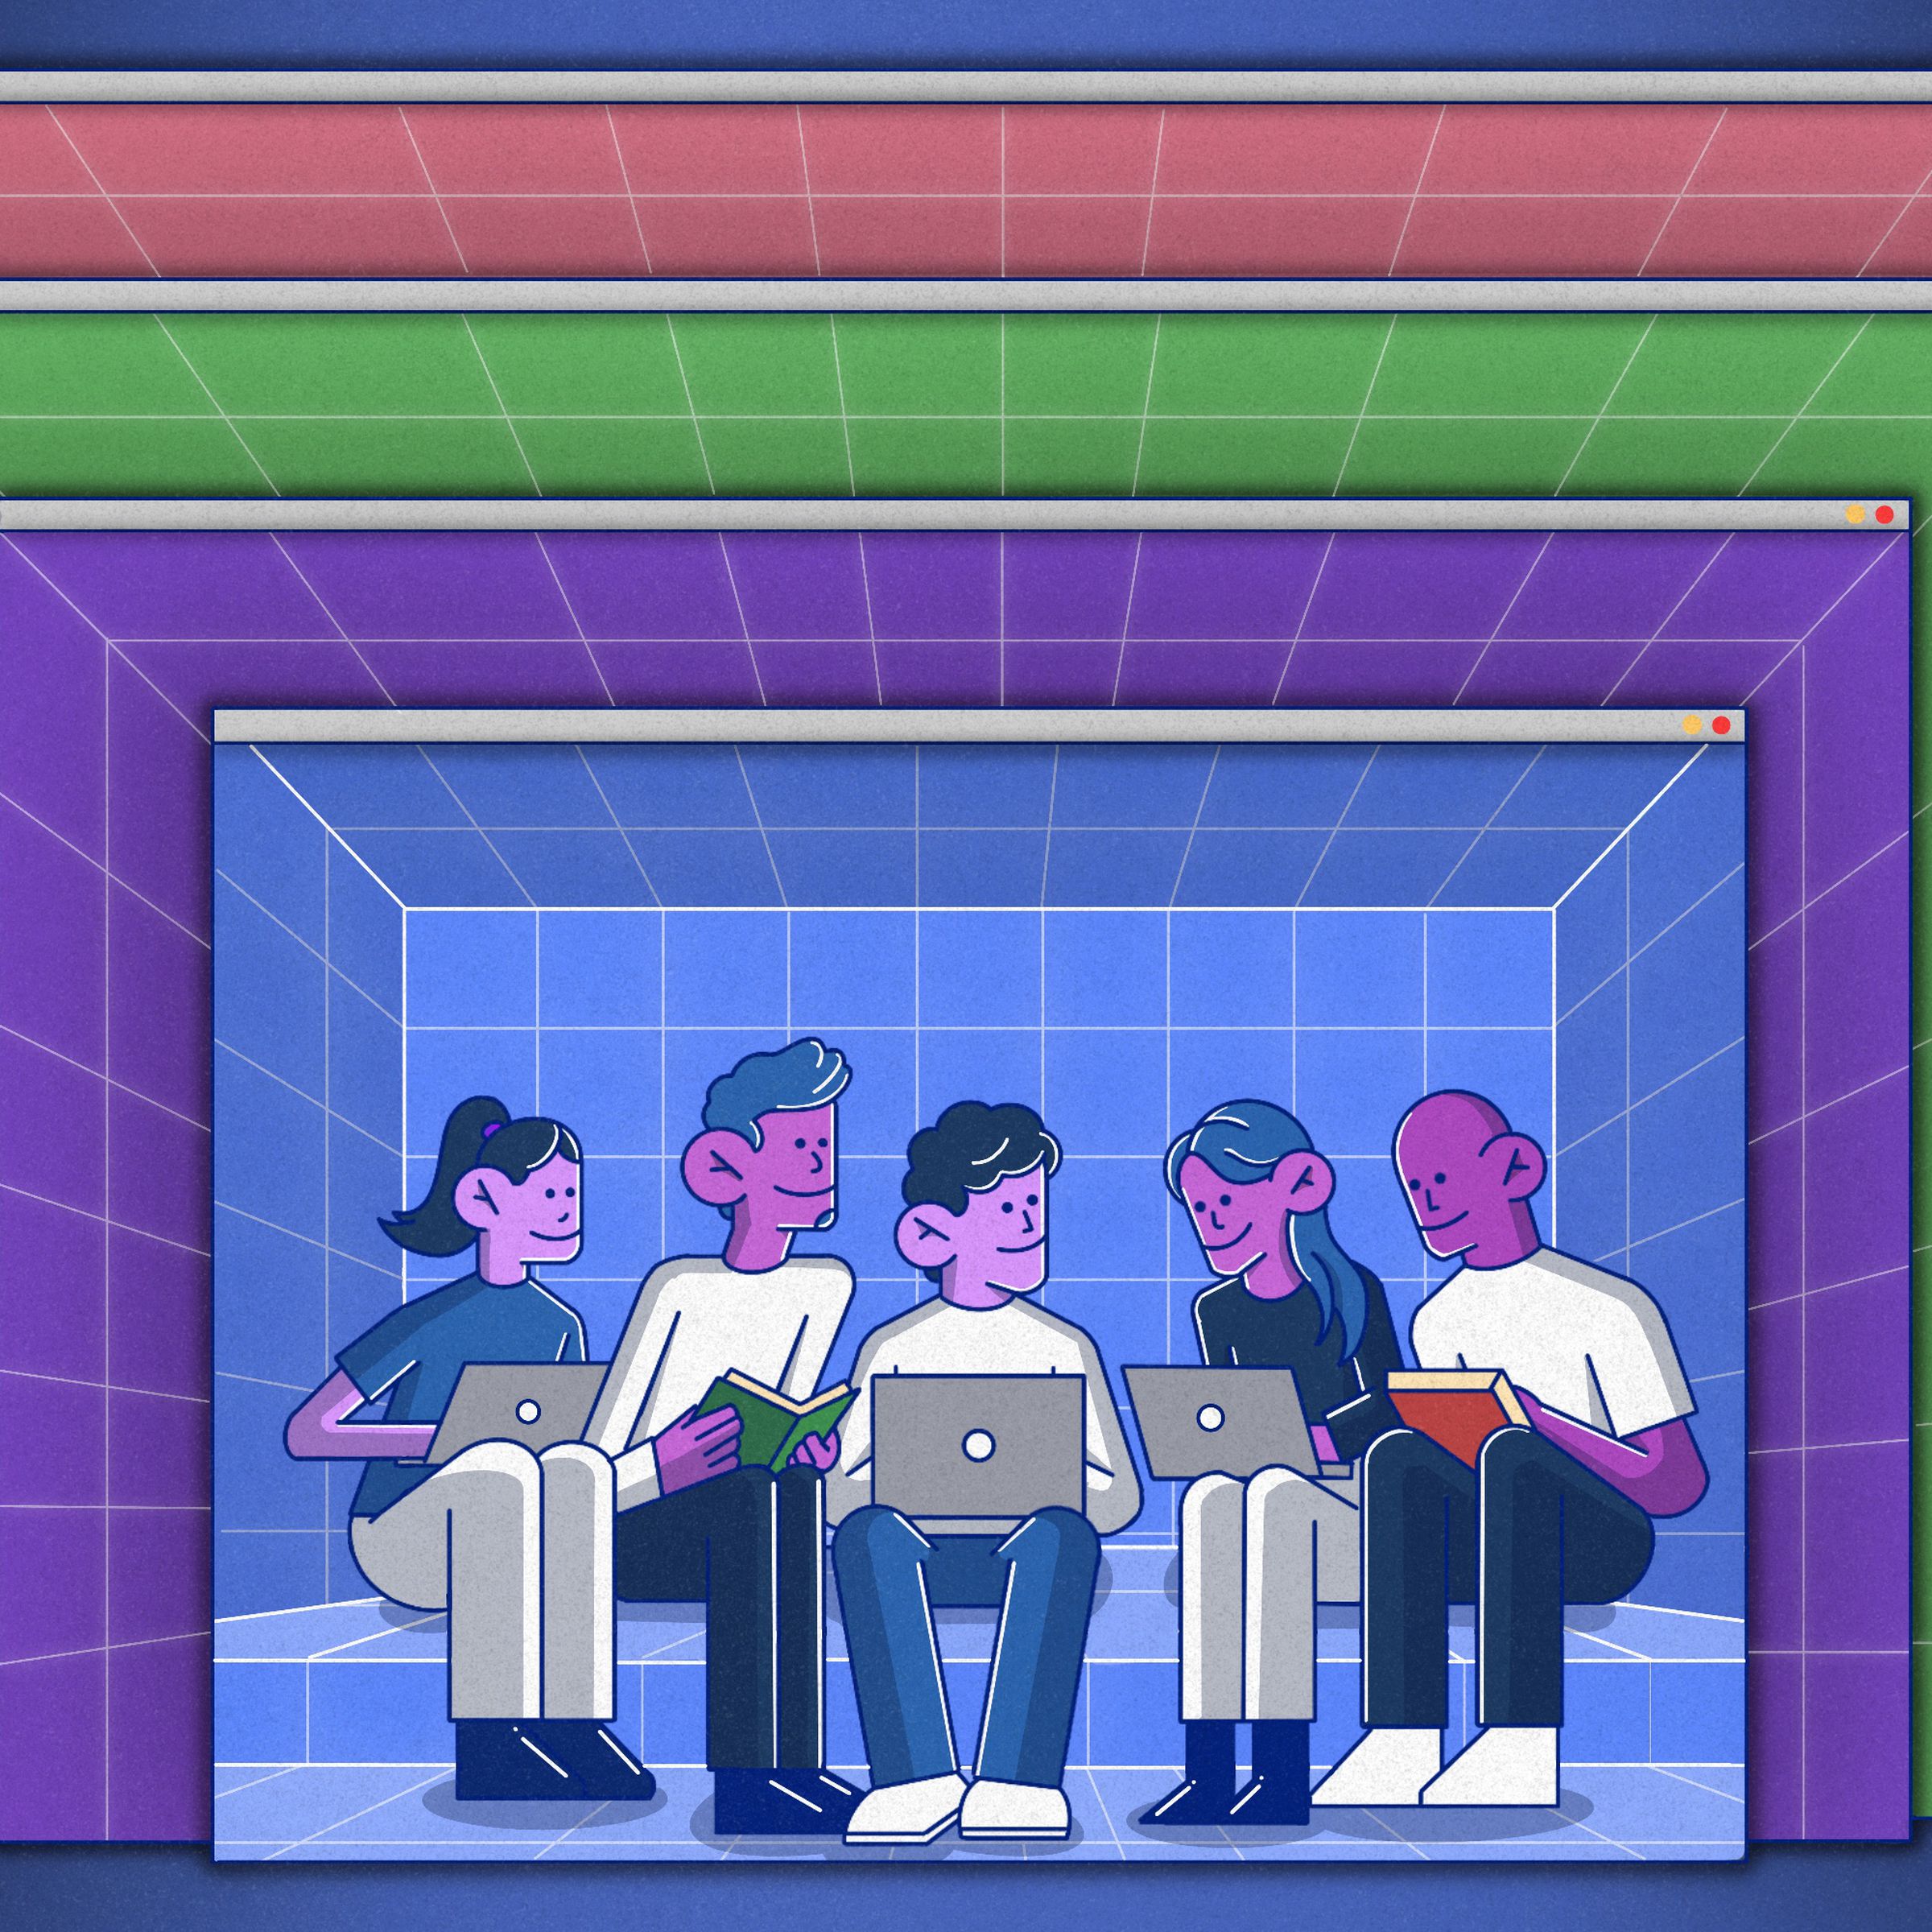 Illustration of five people sitting together on their laptops